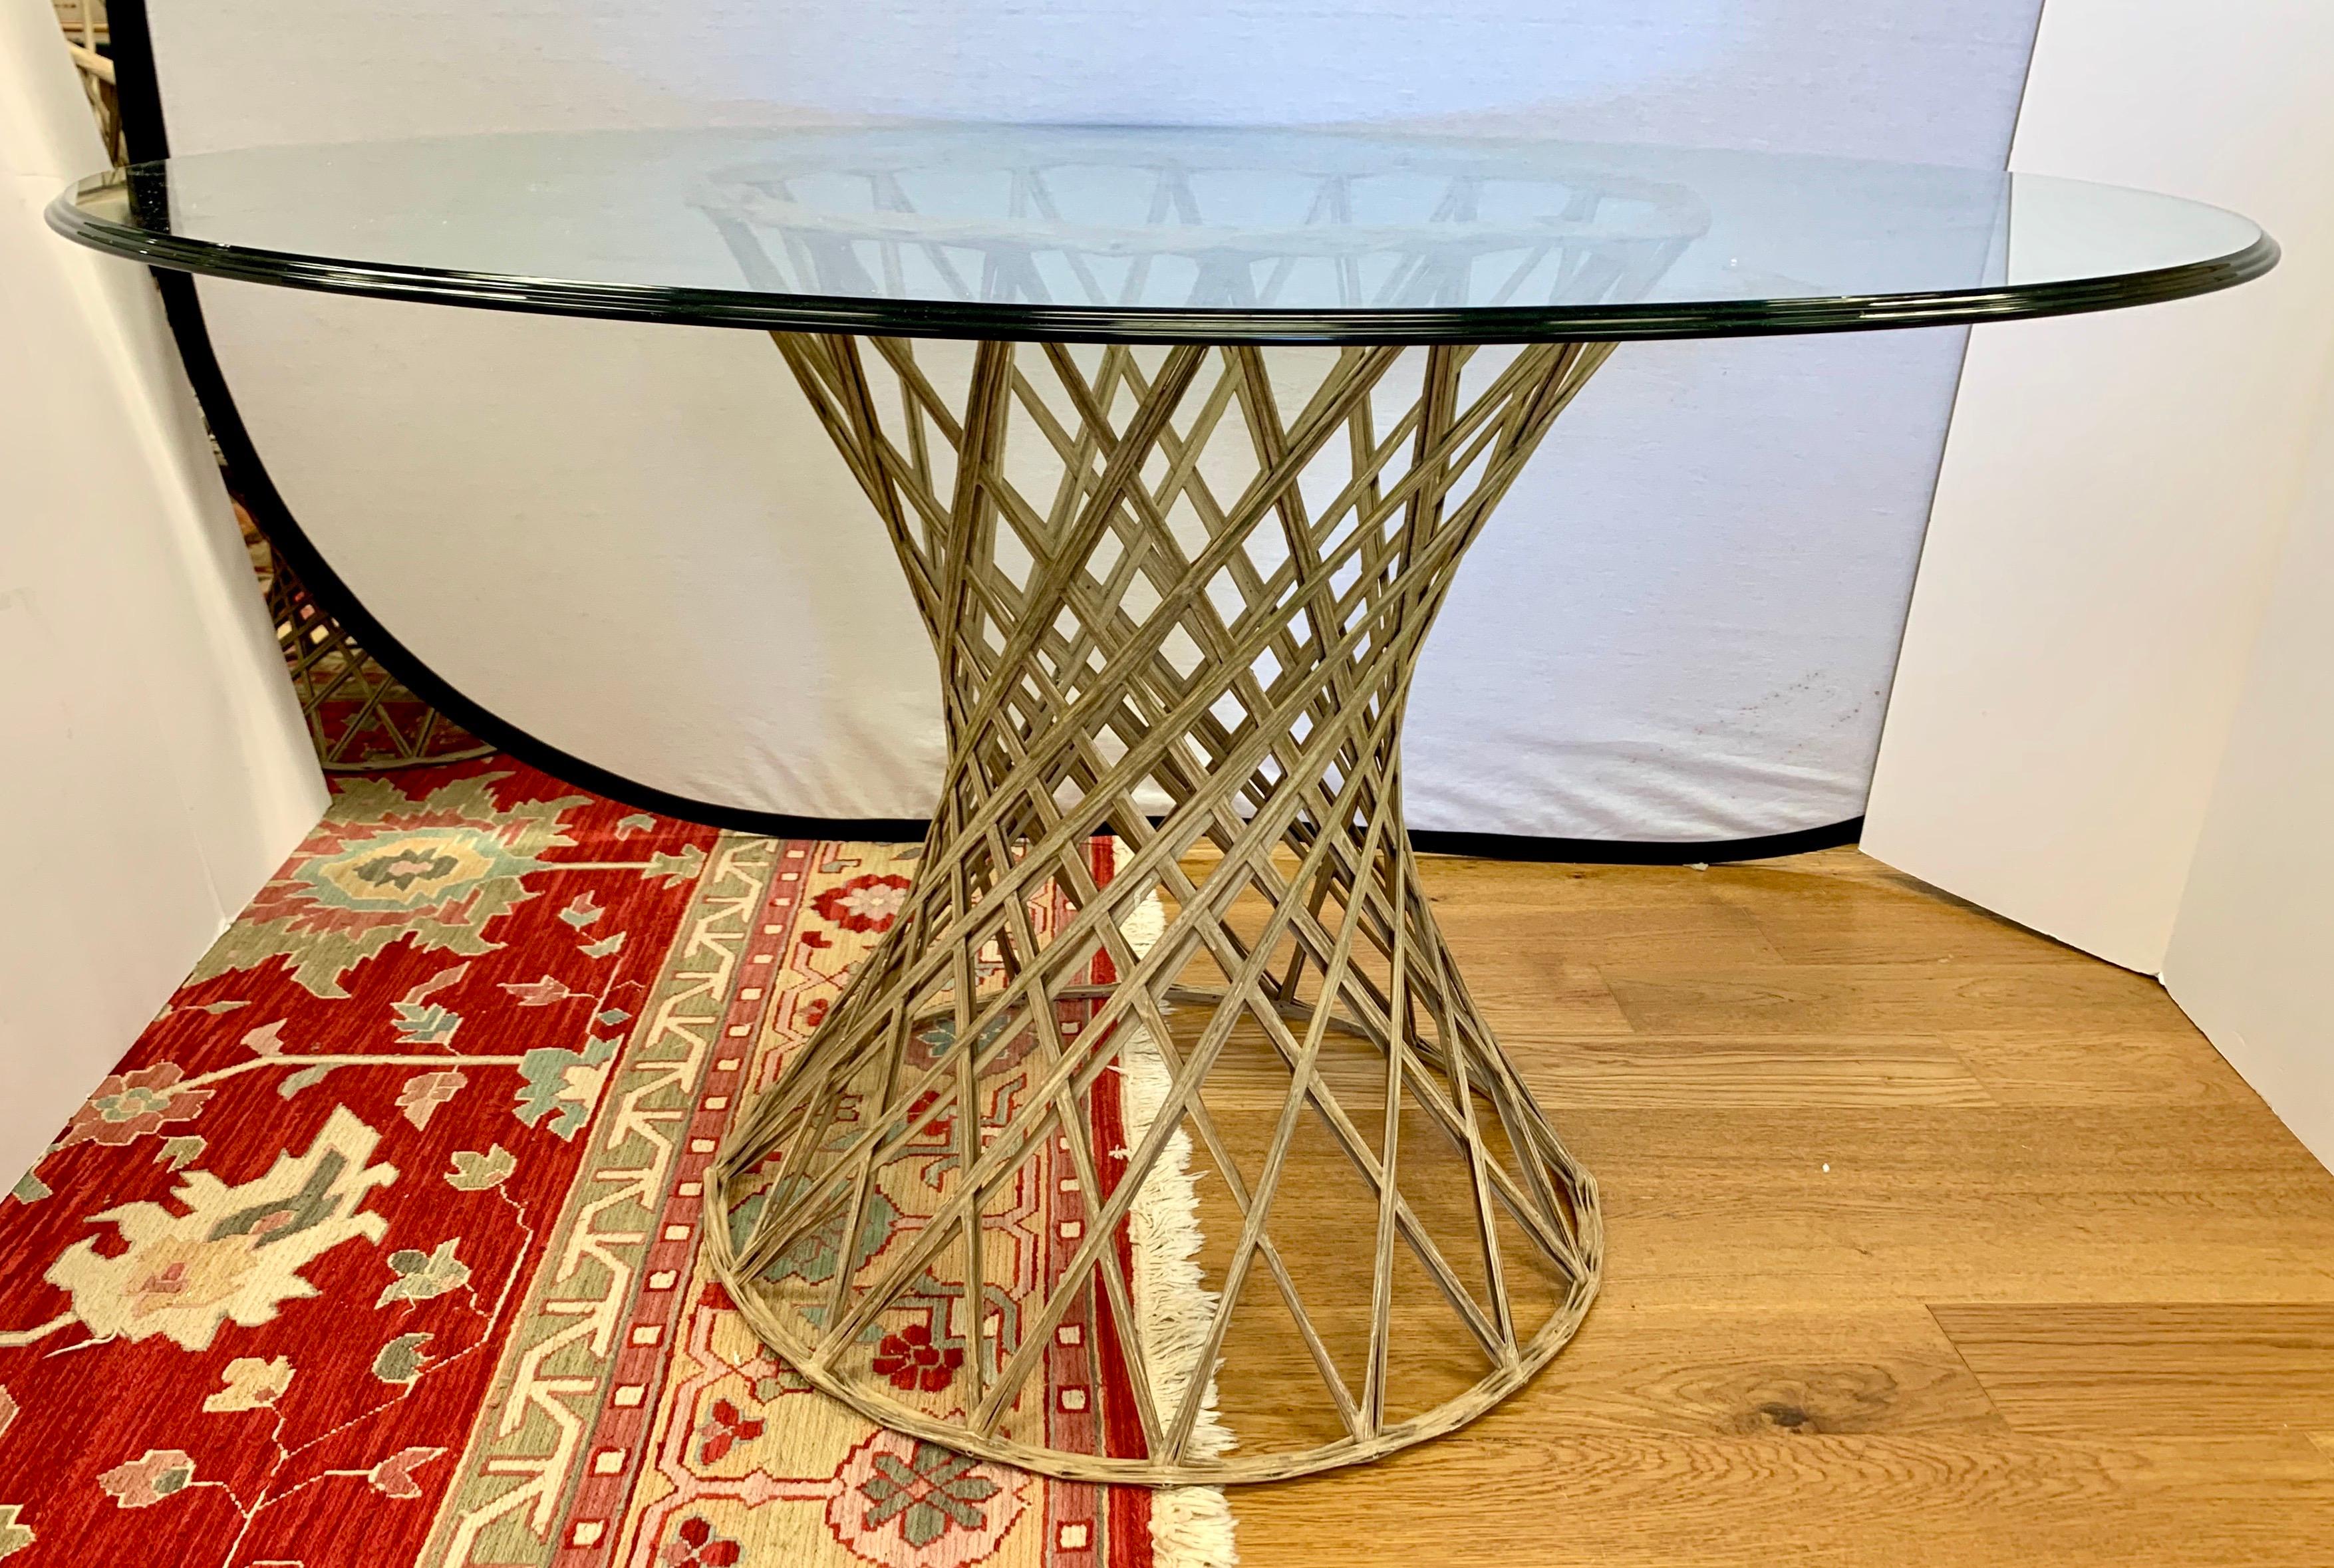 This beautiful mid century modern patio set by Russell Woodard includes four chairs and a round glass top dining table. Unique design made of woven fiberglass with tulip shaped bases. The patio set consists of 4 barrel swivel chairs and matching